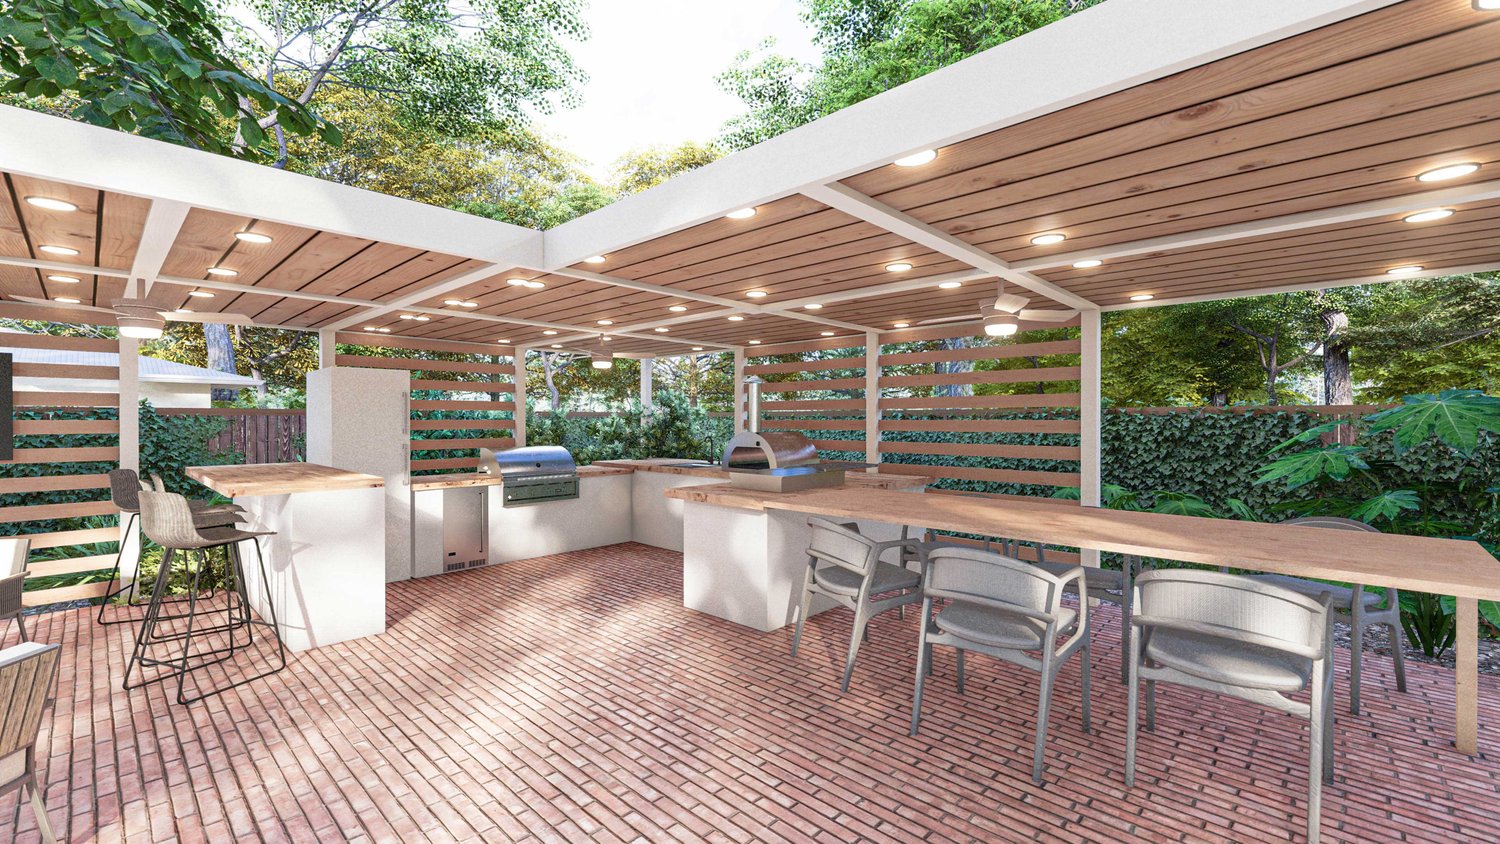 Winter Park outdoor kitchen with dining area and pergola